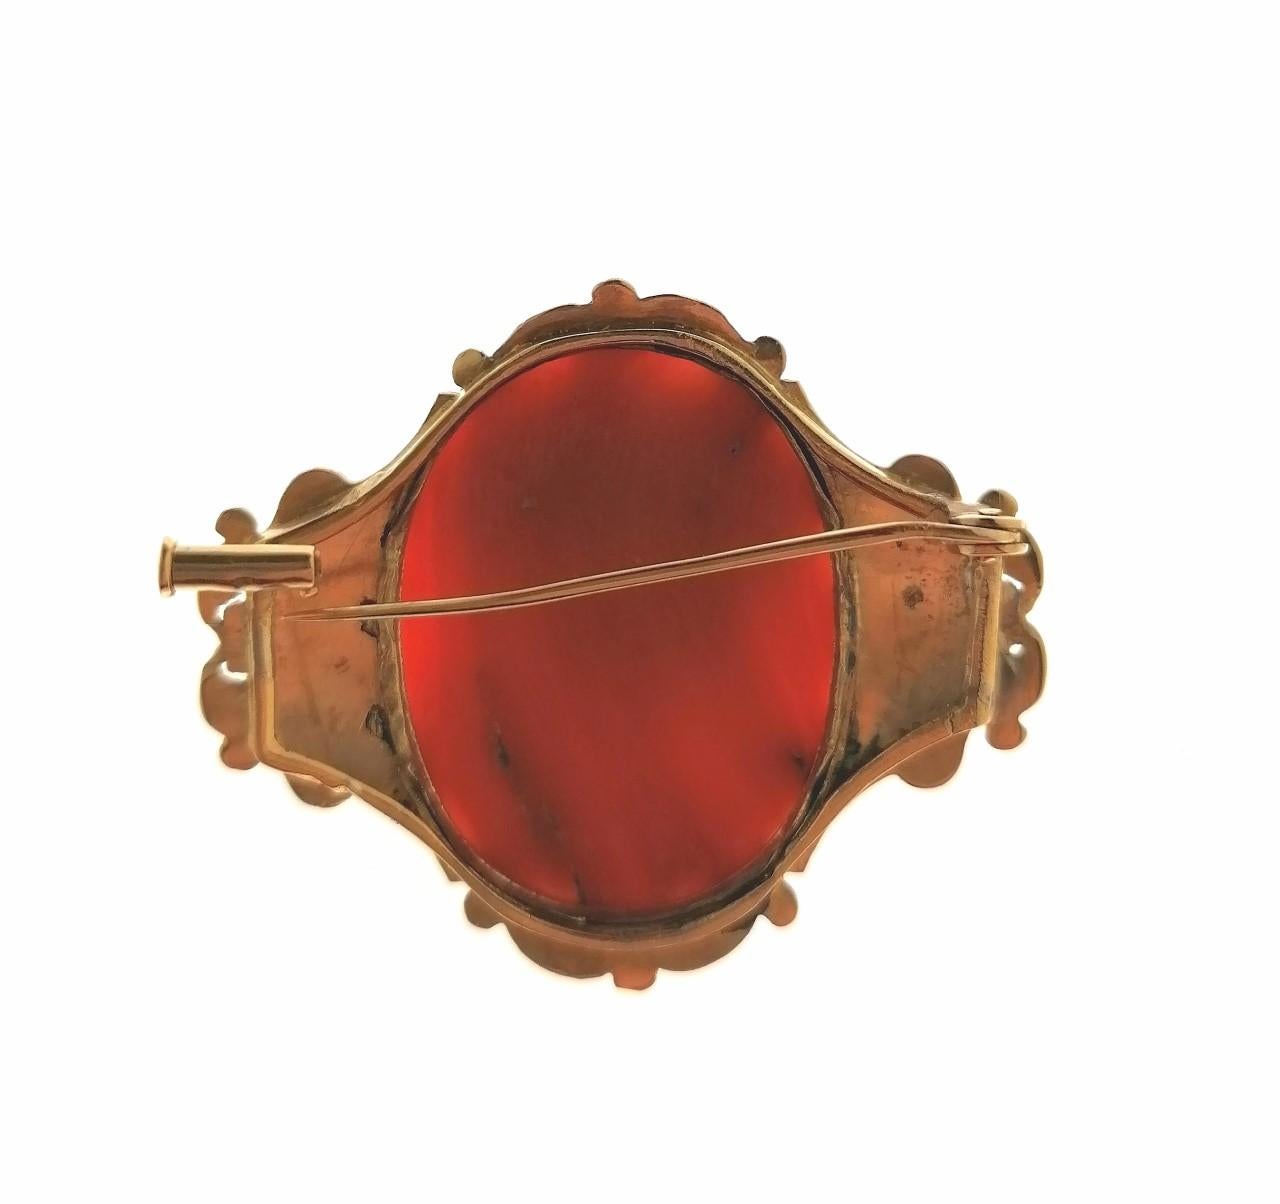 Revival brooch in 22 karat yellow gold with a coral cameo with a classic lady. Wonderful XIXth century handcraft work.